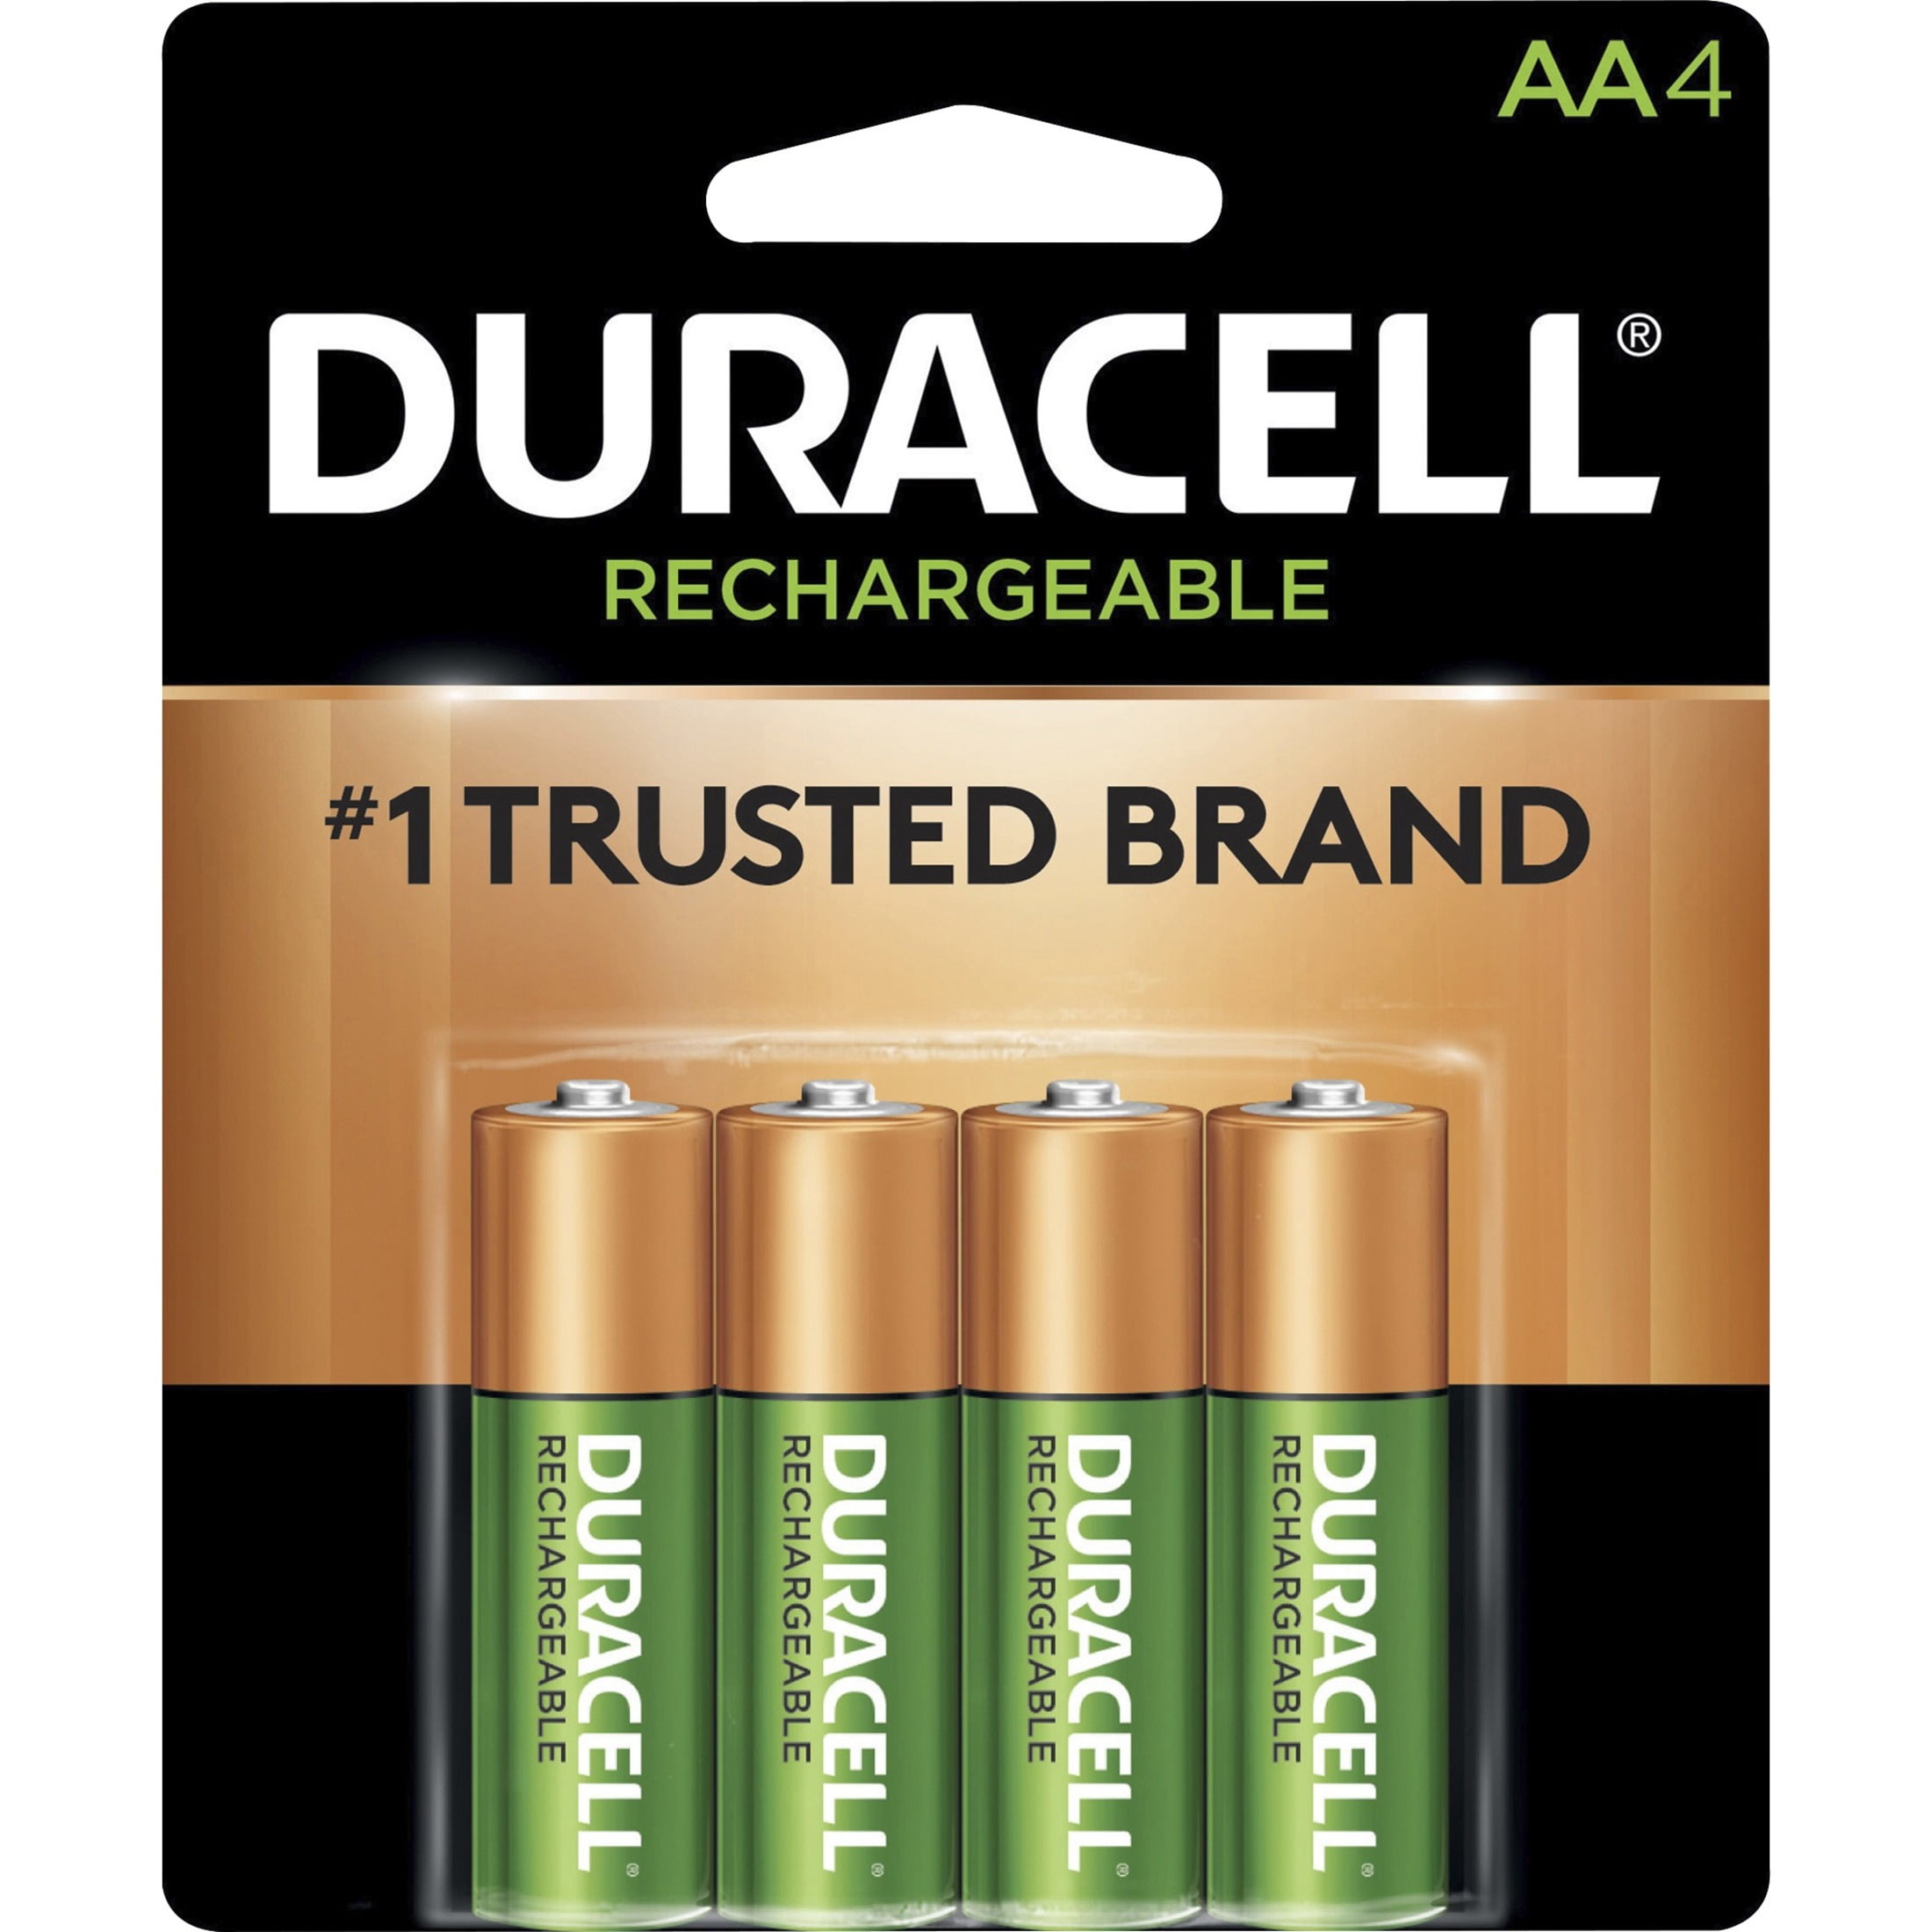 MDHAND 16 PCS AA Batteries, 1.5v 9800mAh Rechargeable Battery,  High-Performance Double A Batteries with 4 Slots Battery Charger for  Flashlight Toys